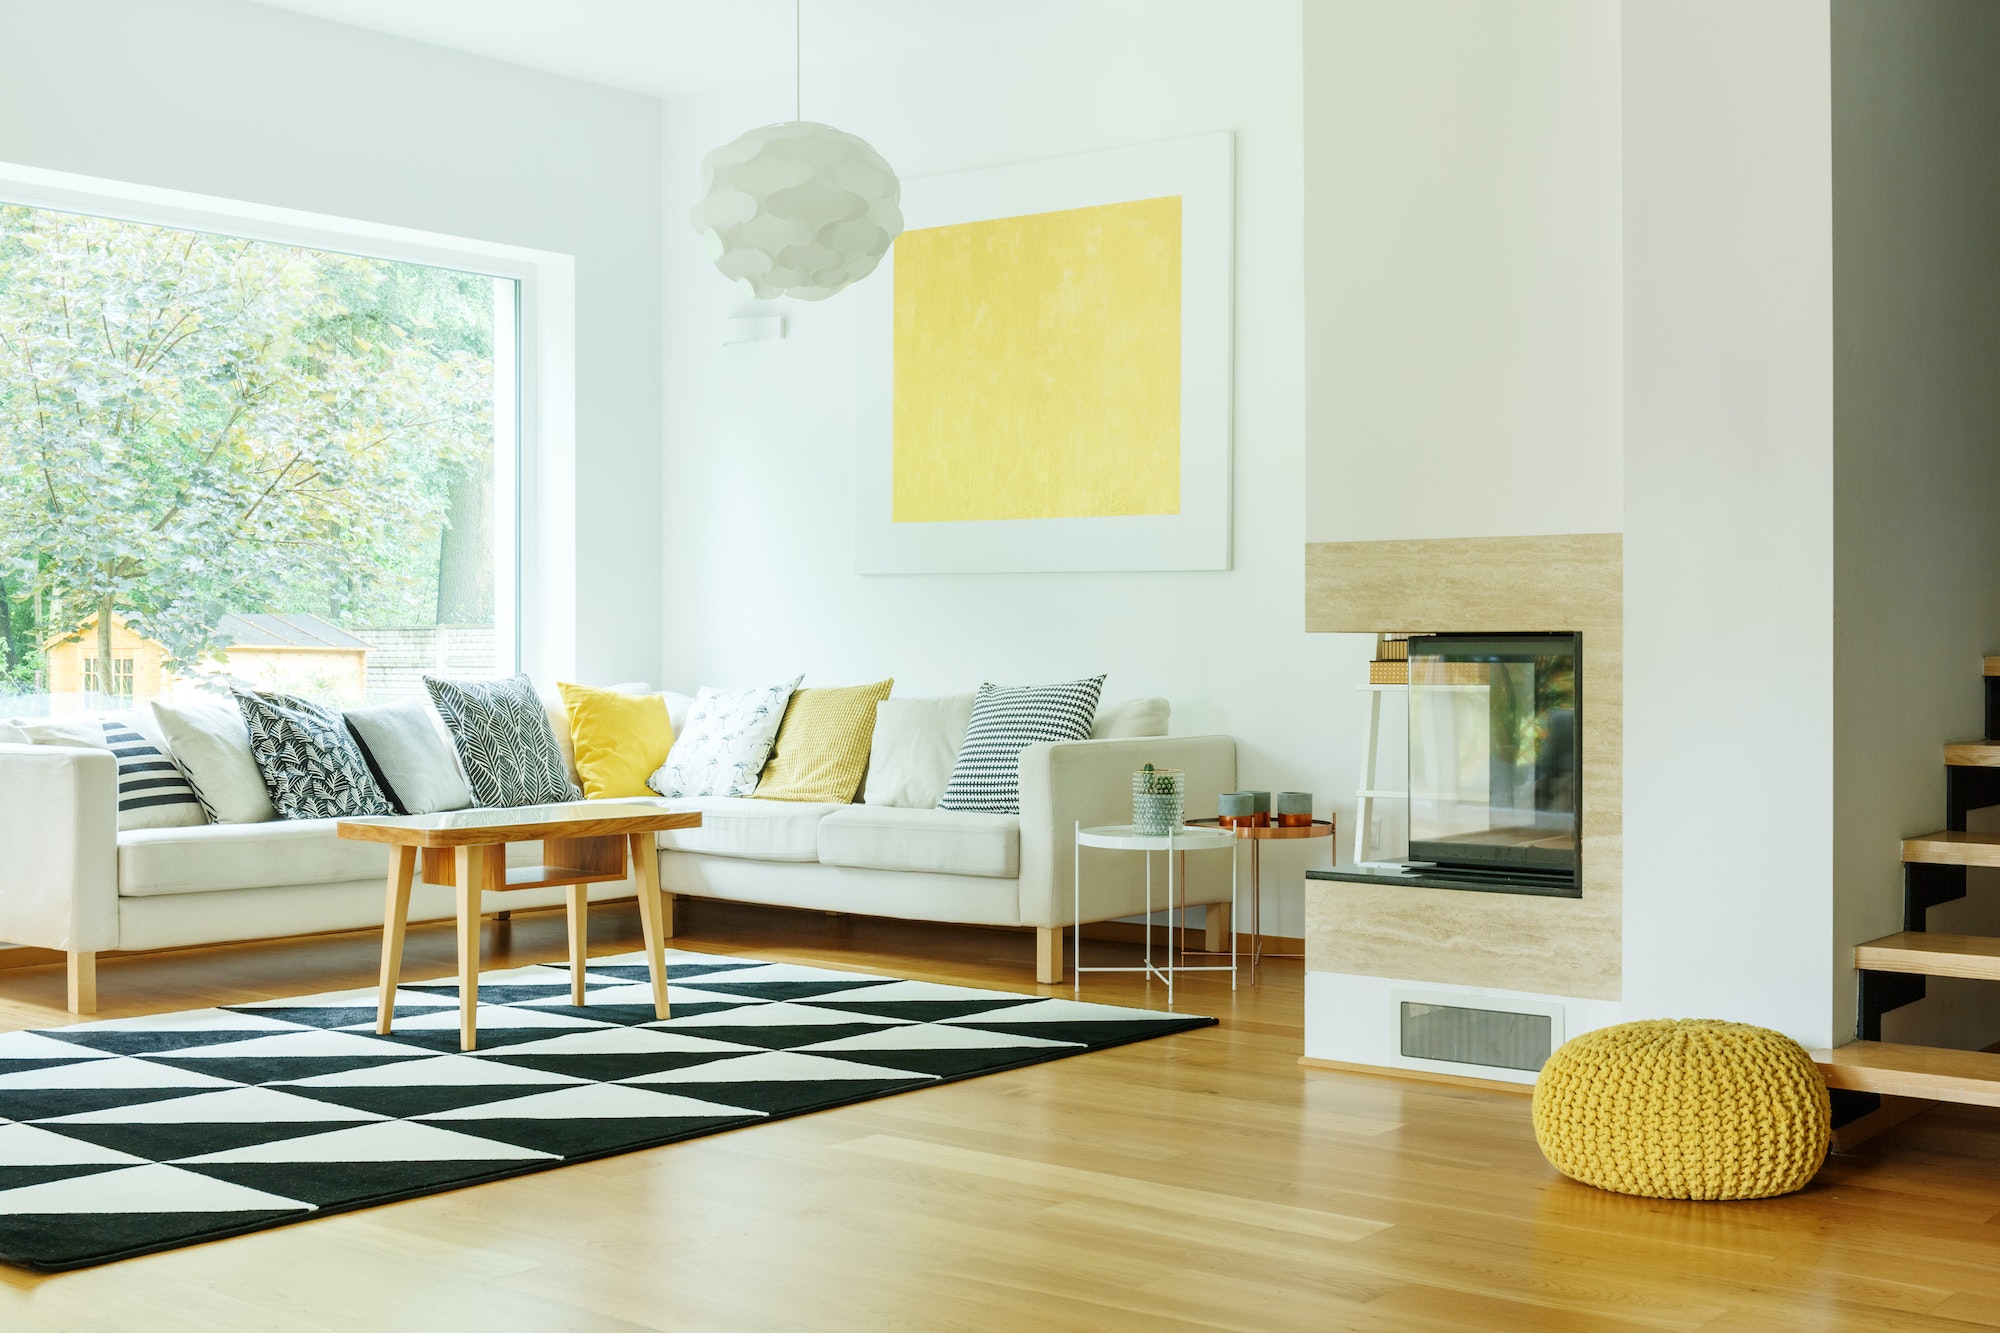 How to Get the Best Results From Your Interior Painting Project